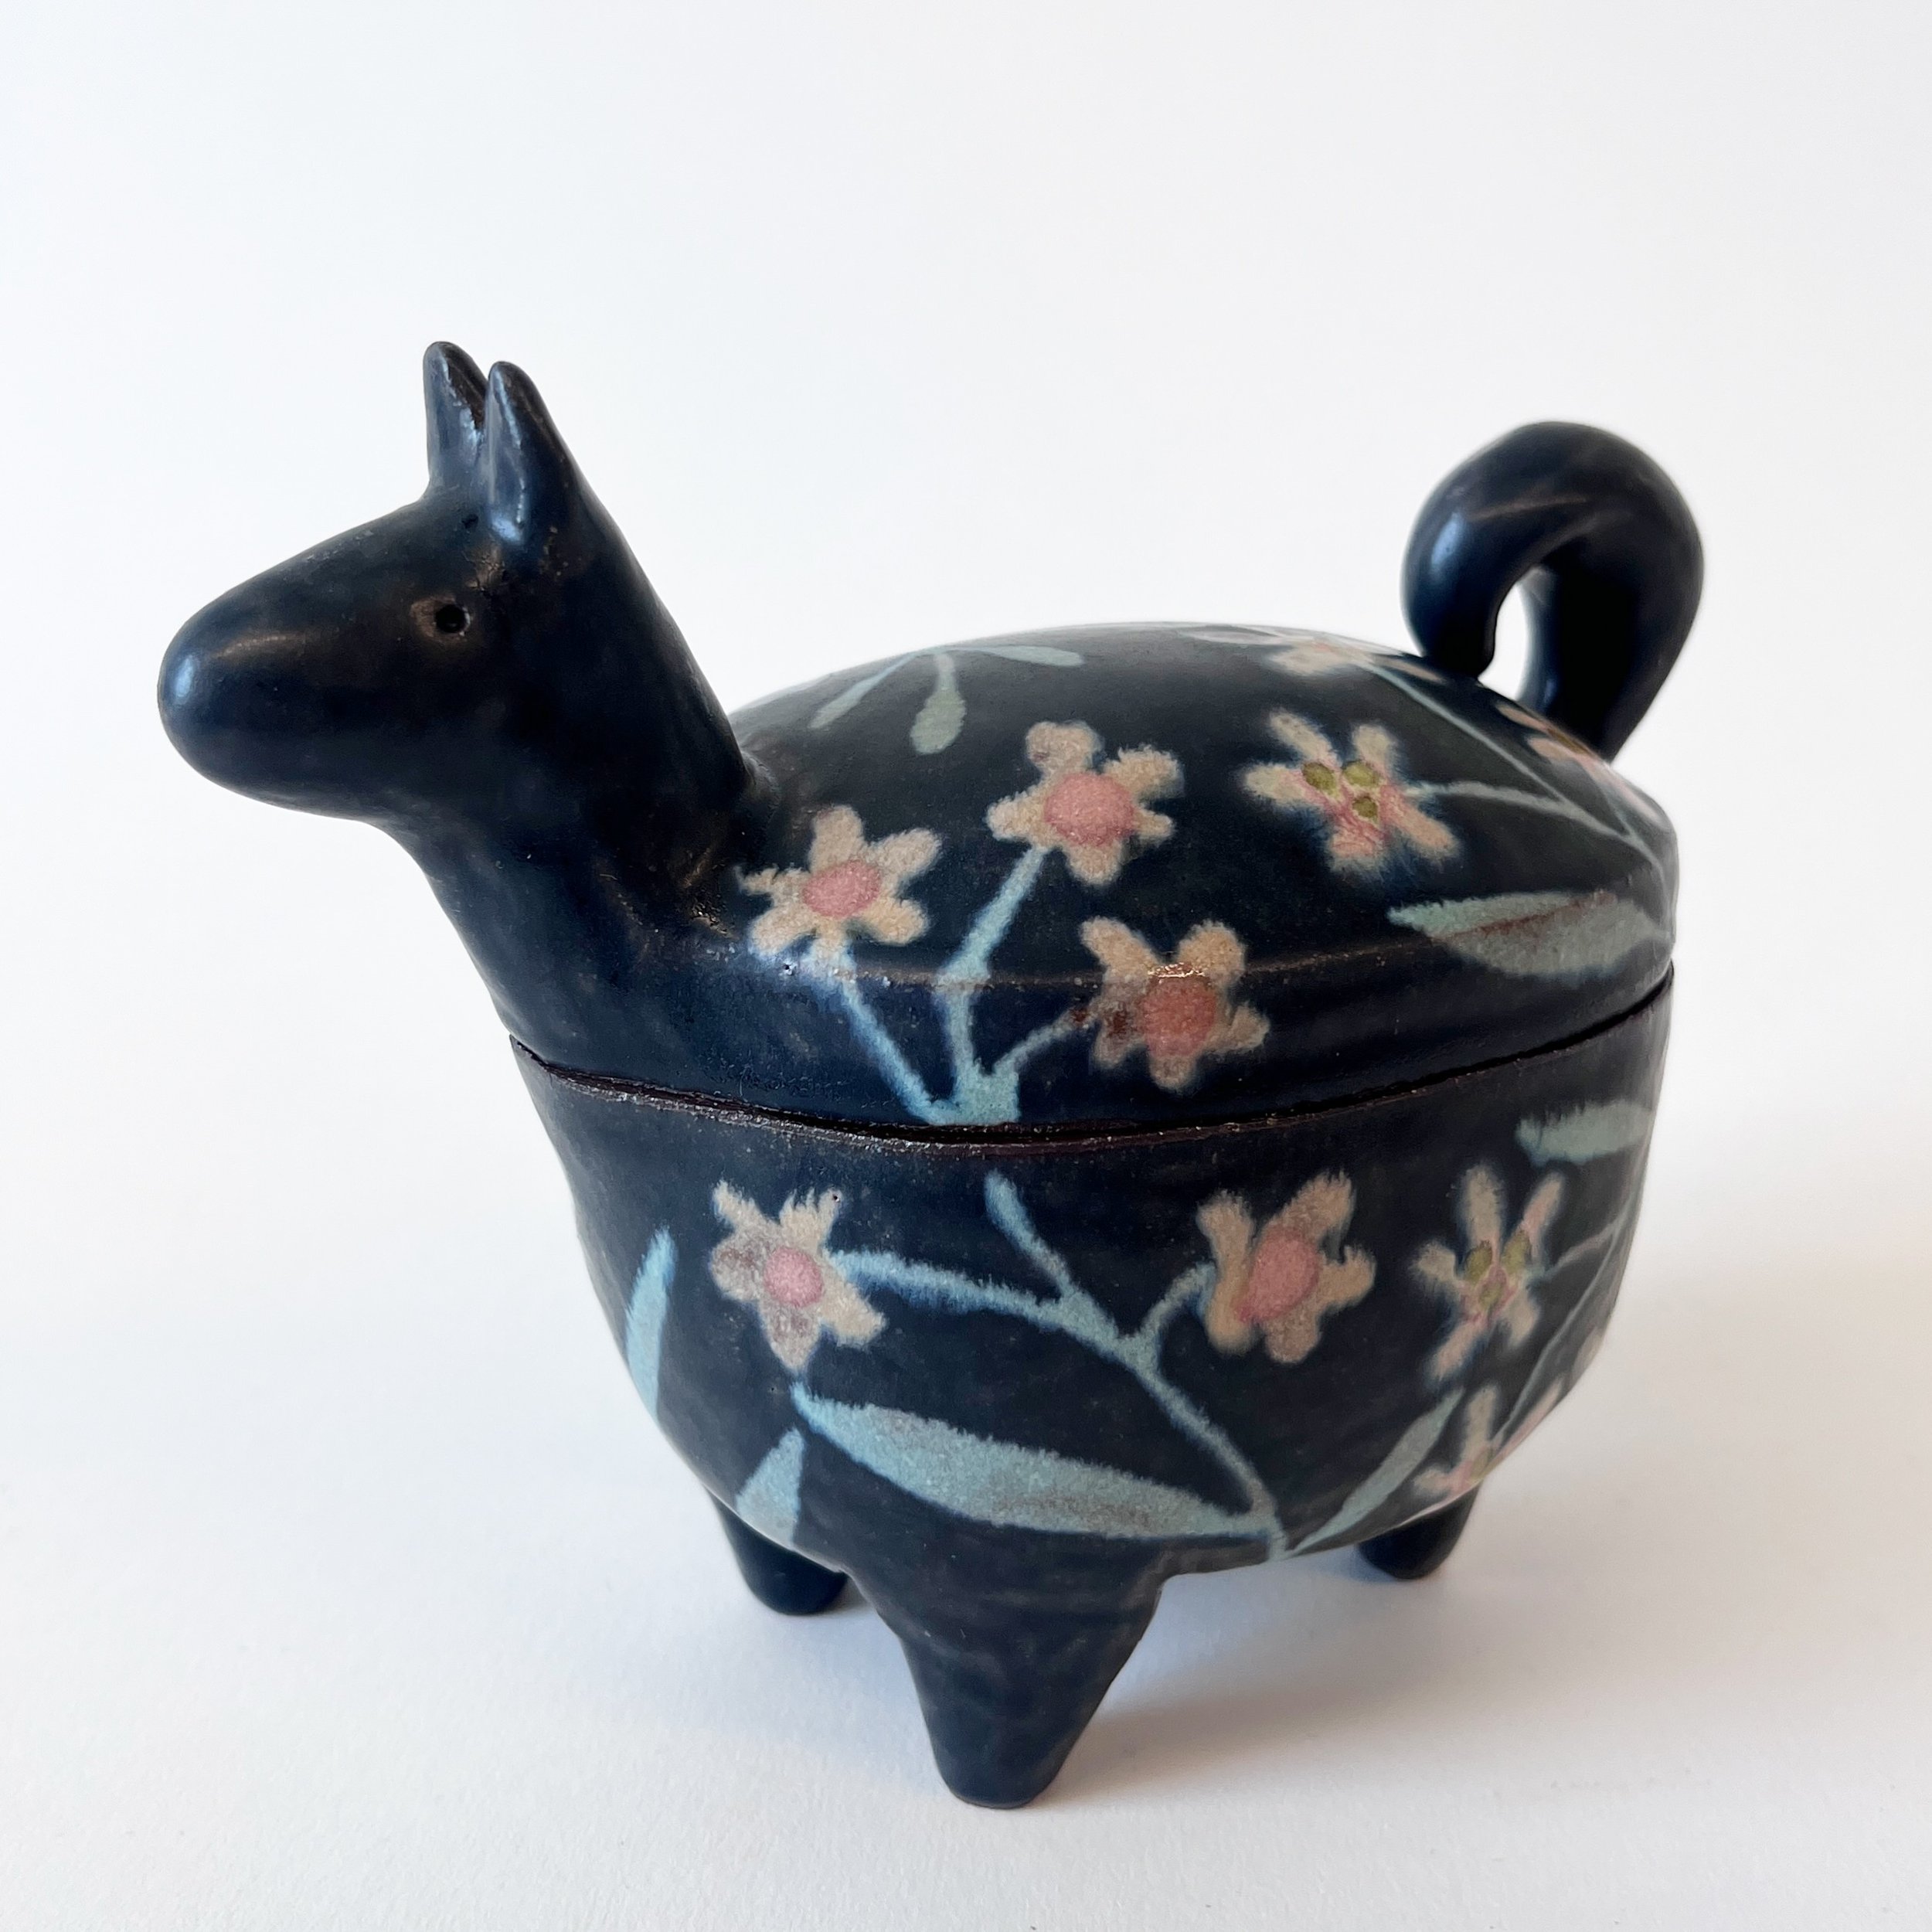 New work just added to my online shop including a couple animal jars!

#rutheasterbrookceramics